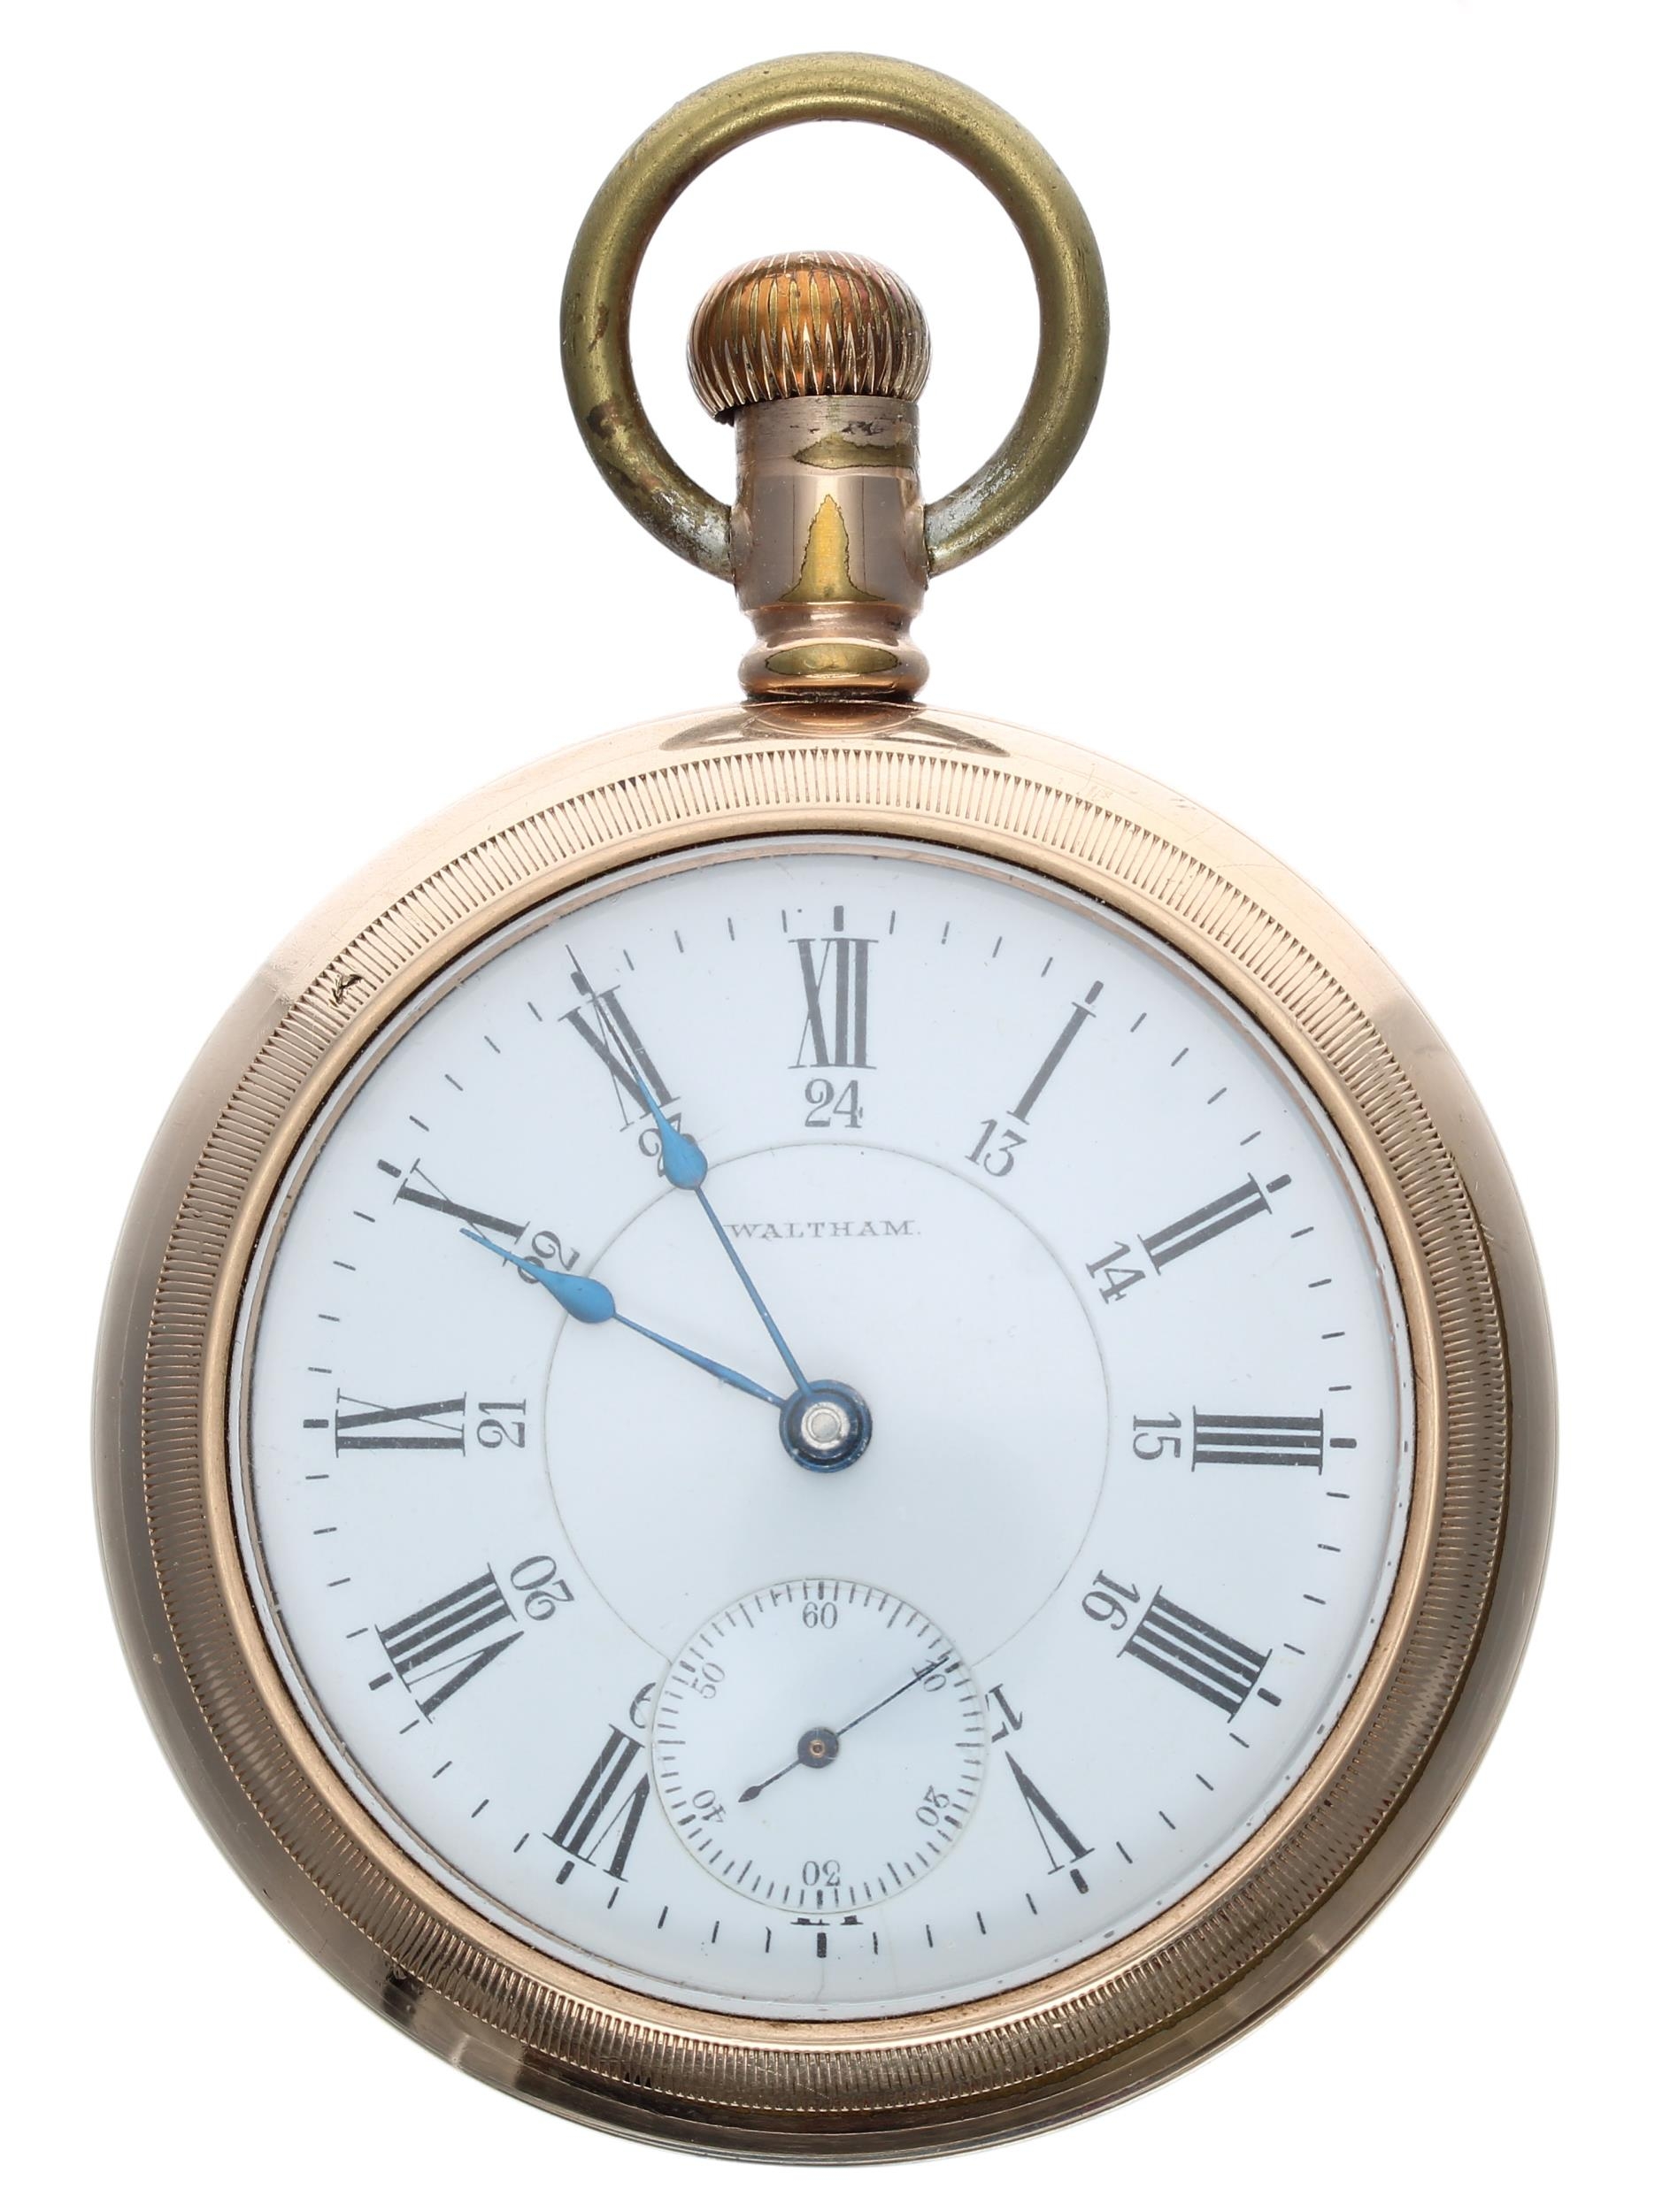 American Waltham 'Appleton Tracy & Co.' gold plated lever pocket watch, circa 1900, signed 17 - Image 2 of 4